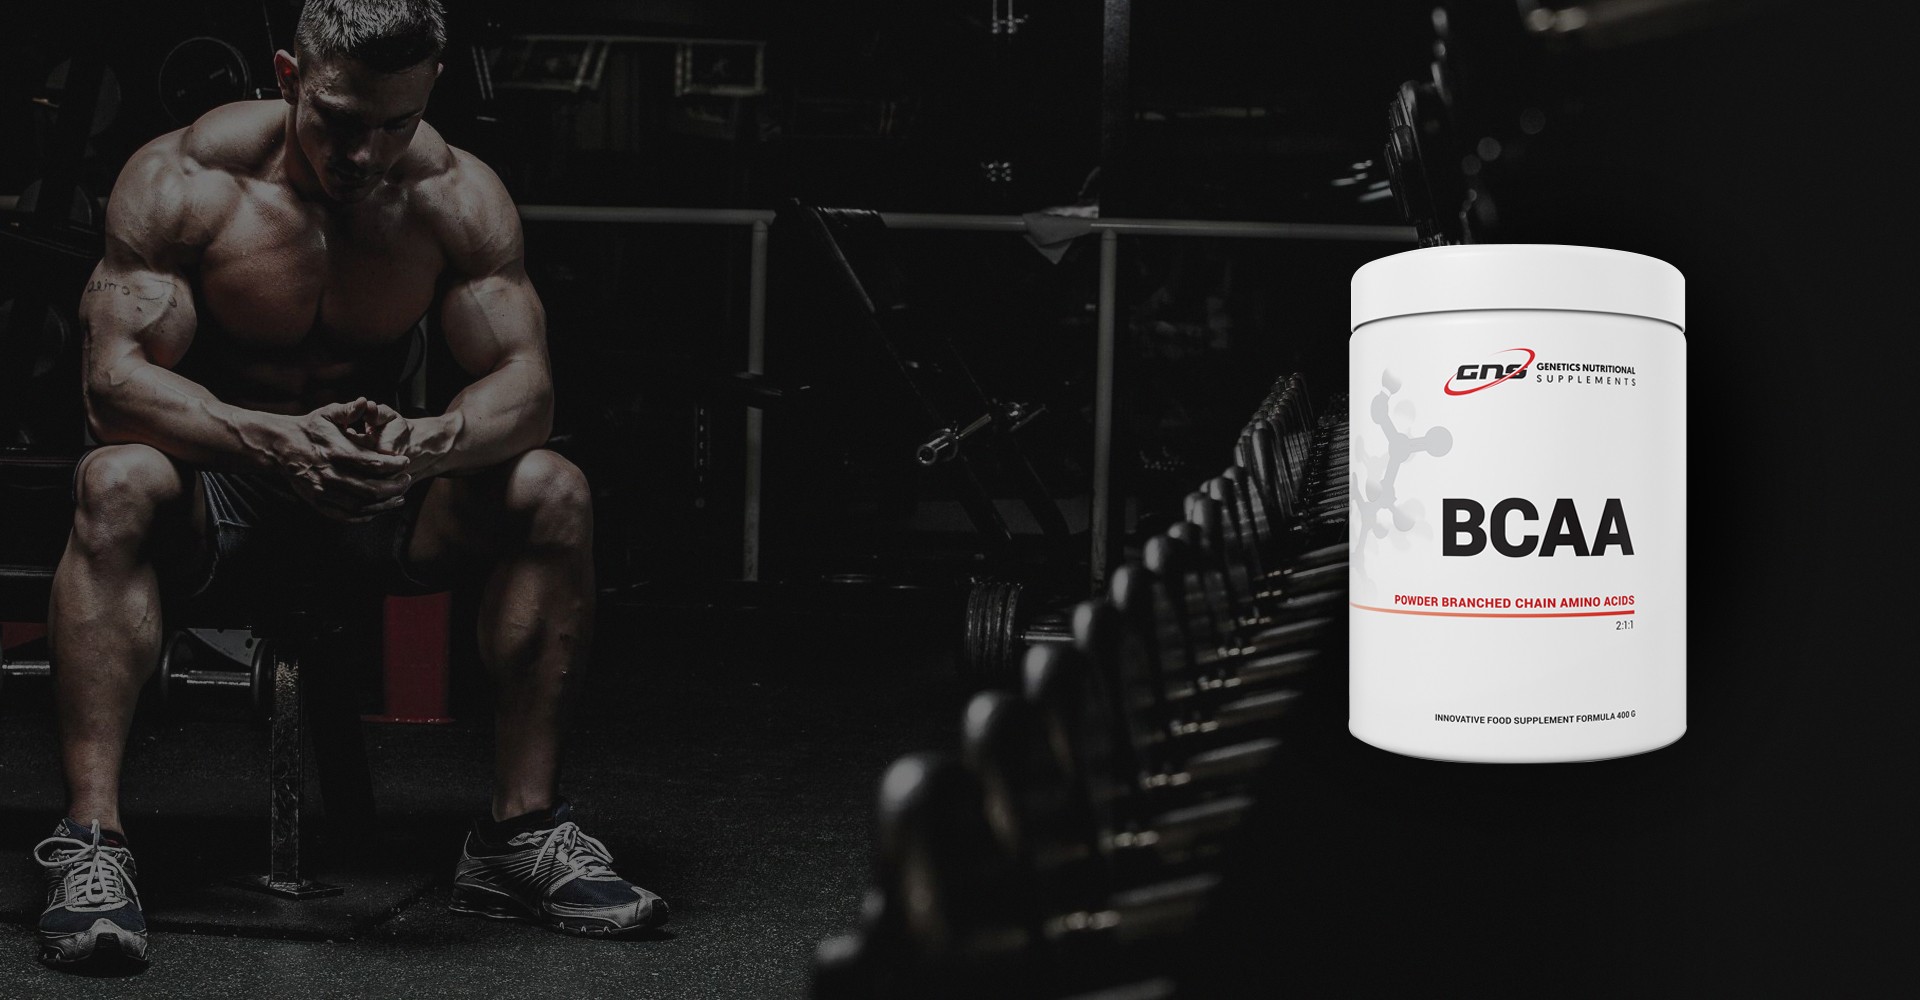 BCAA : BRANCHED CHAIN AMINO ACIDS